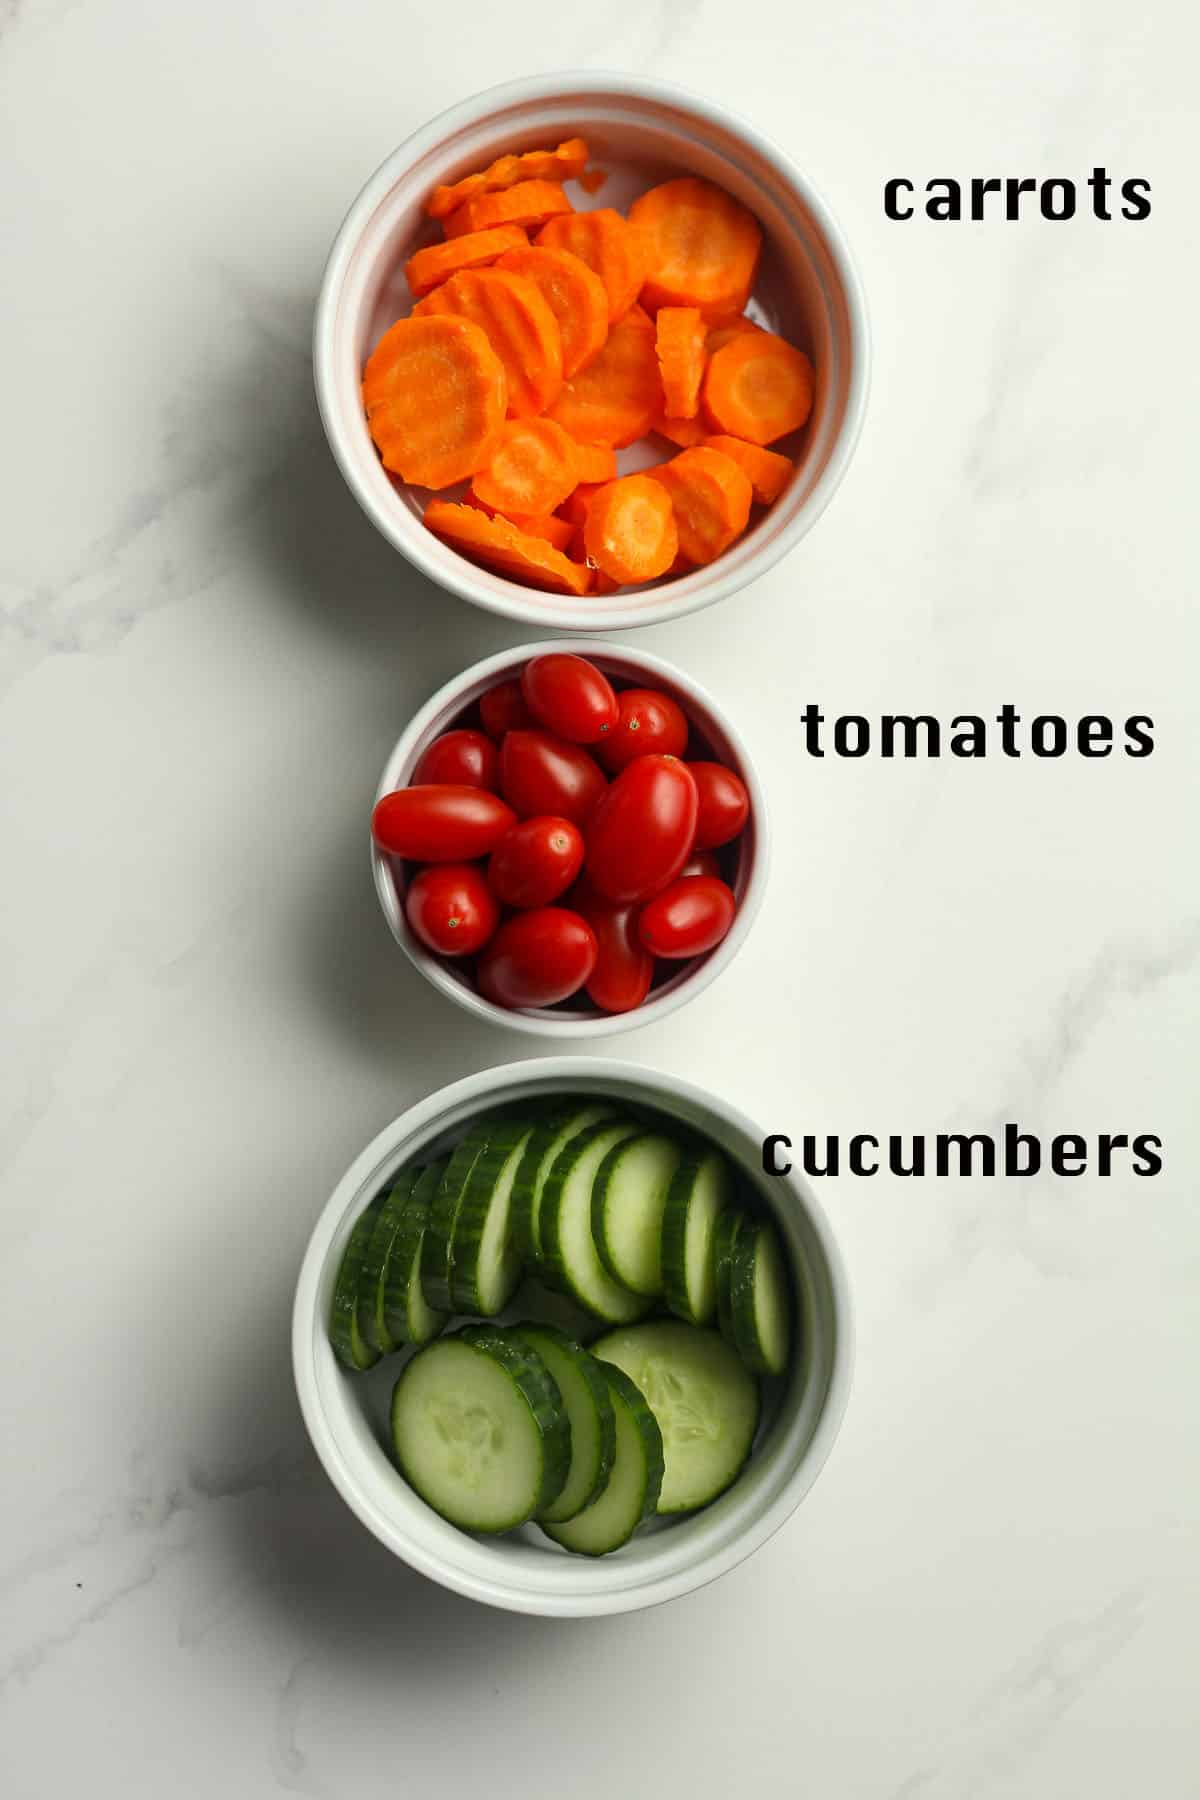 Bowls of carrots, tomatoes and cucumbers.